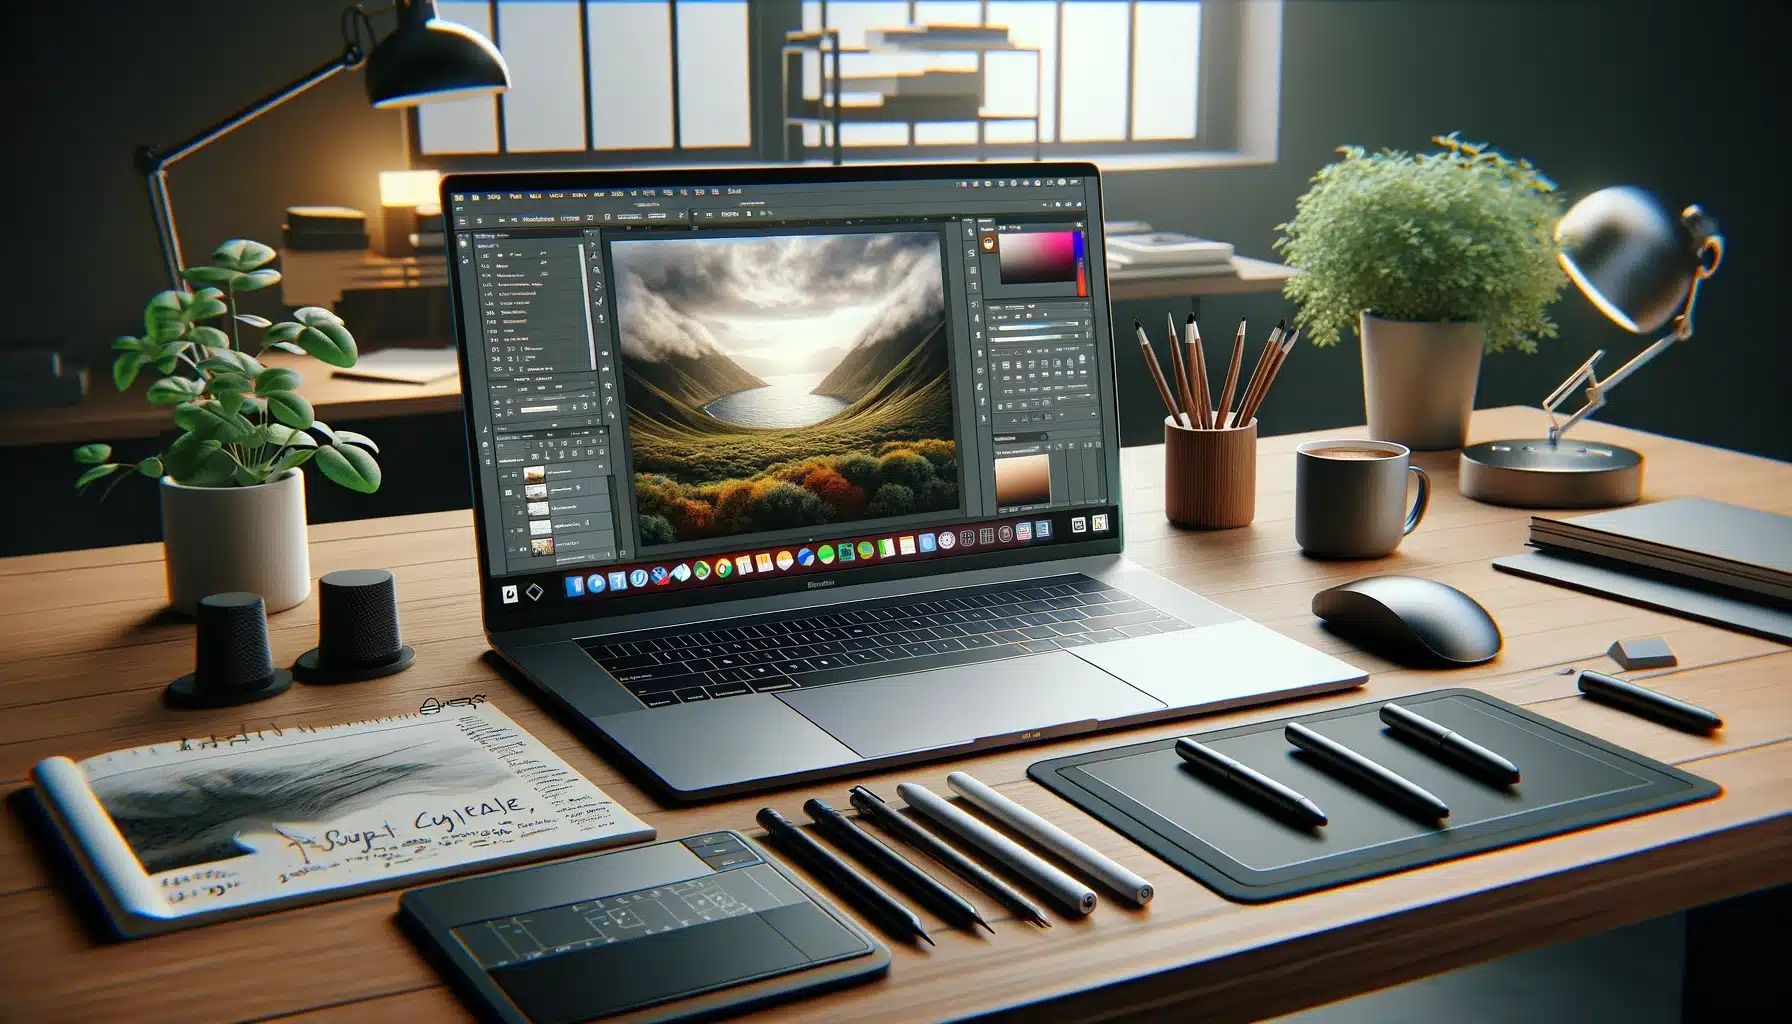 A modern working desk featuring a high-end laptop displaying advanced image upscaling settings in Photoshop, accompanied by professional accessories like a graphic tablet and notes on digital image processing.